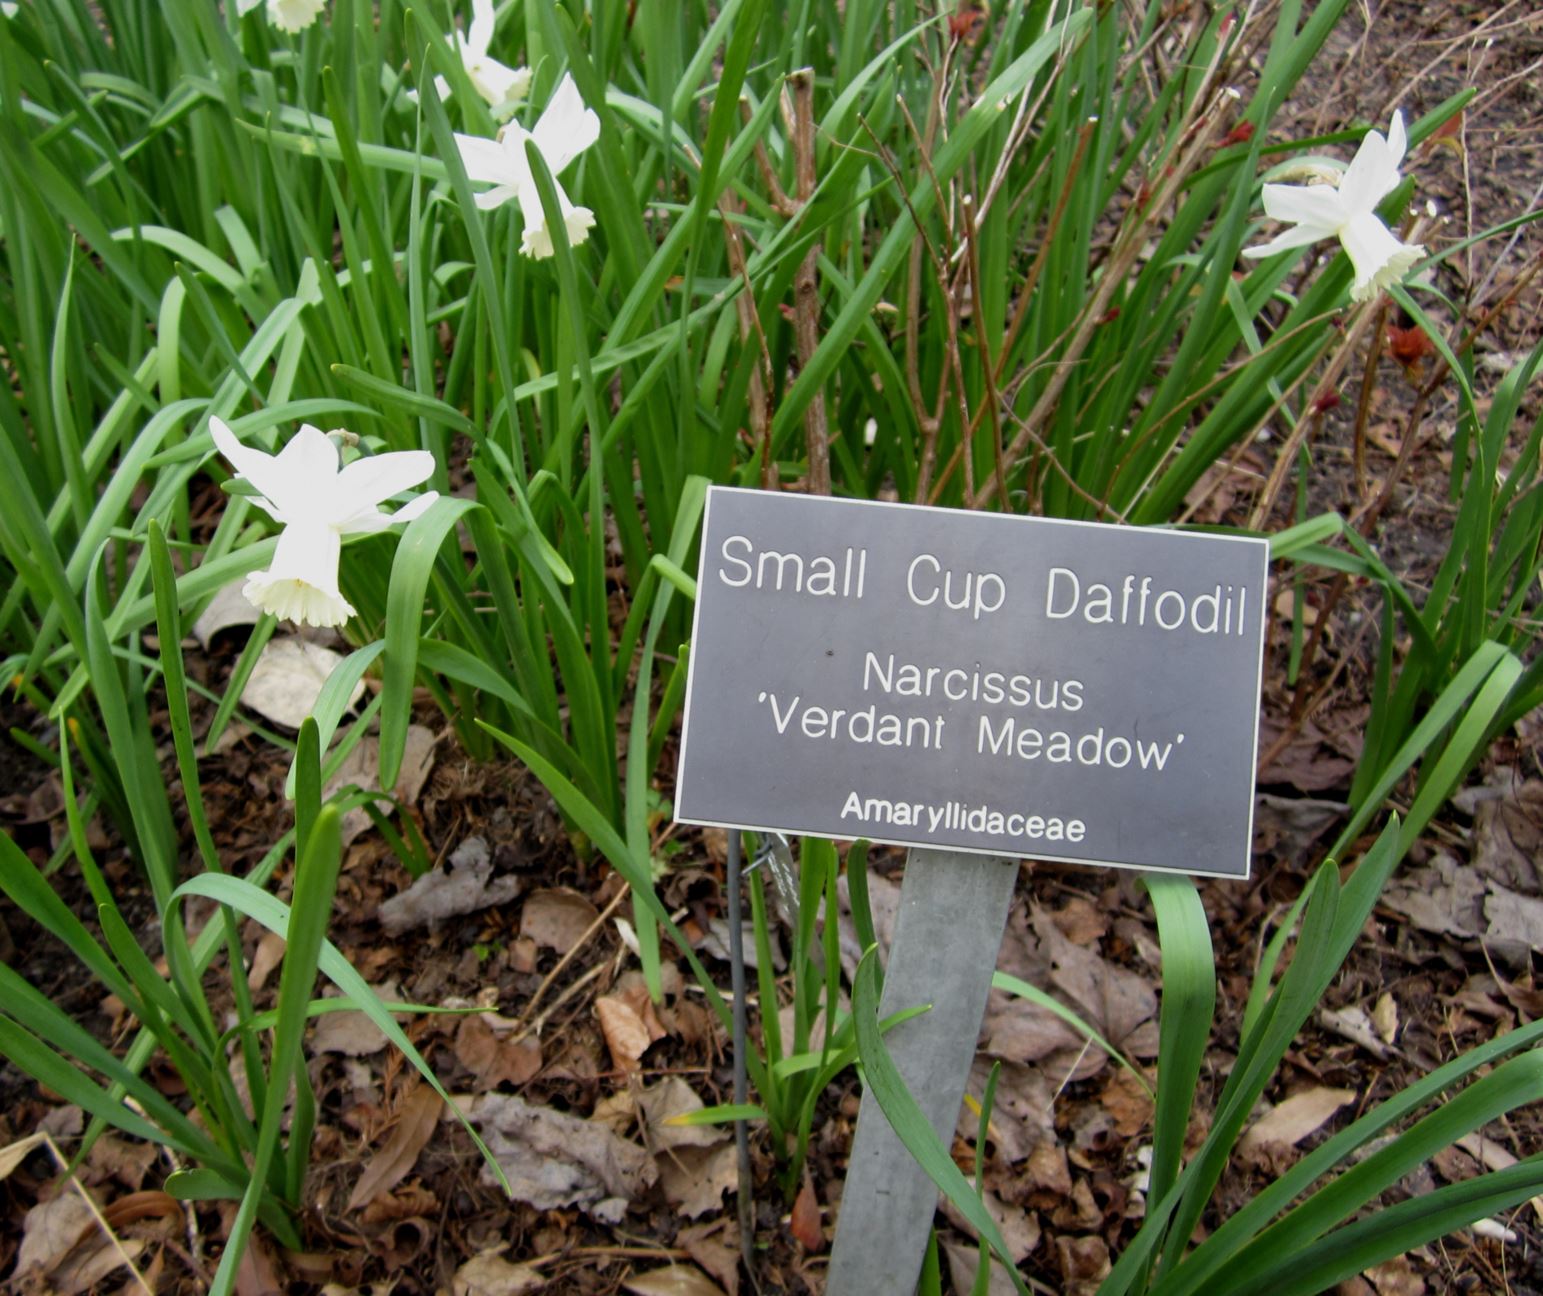 Narcissus 'Verdant Meadow' - small-cupped daffodil